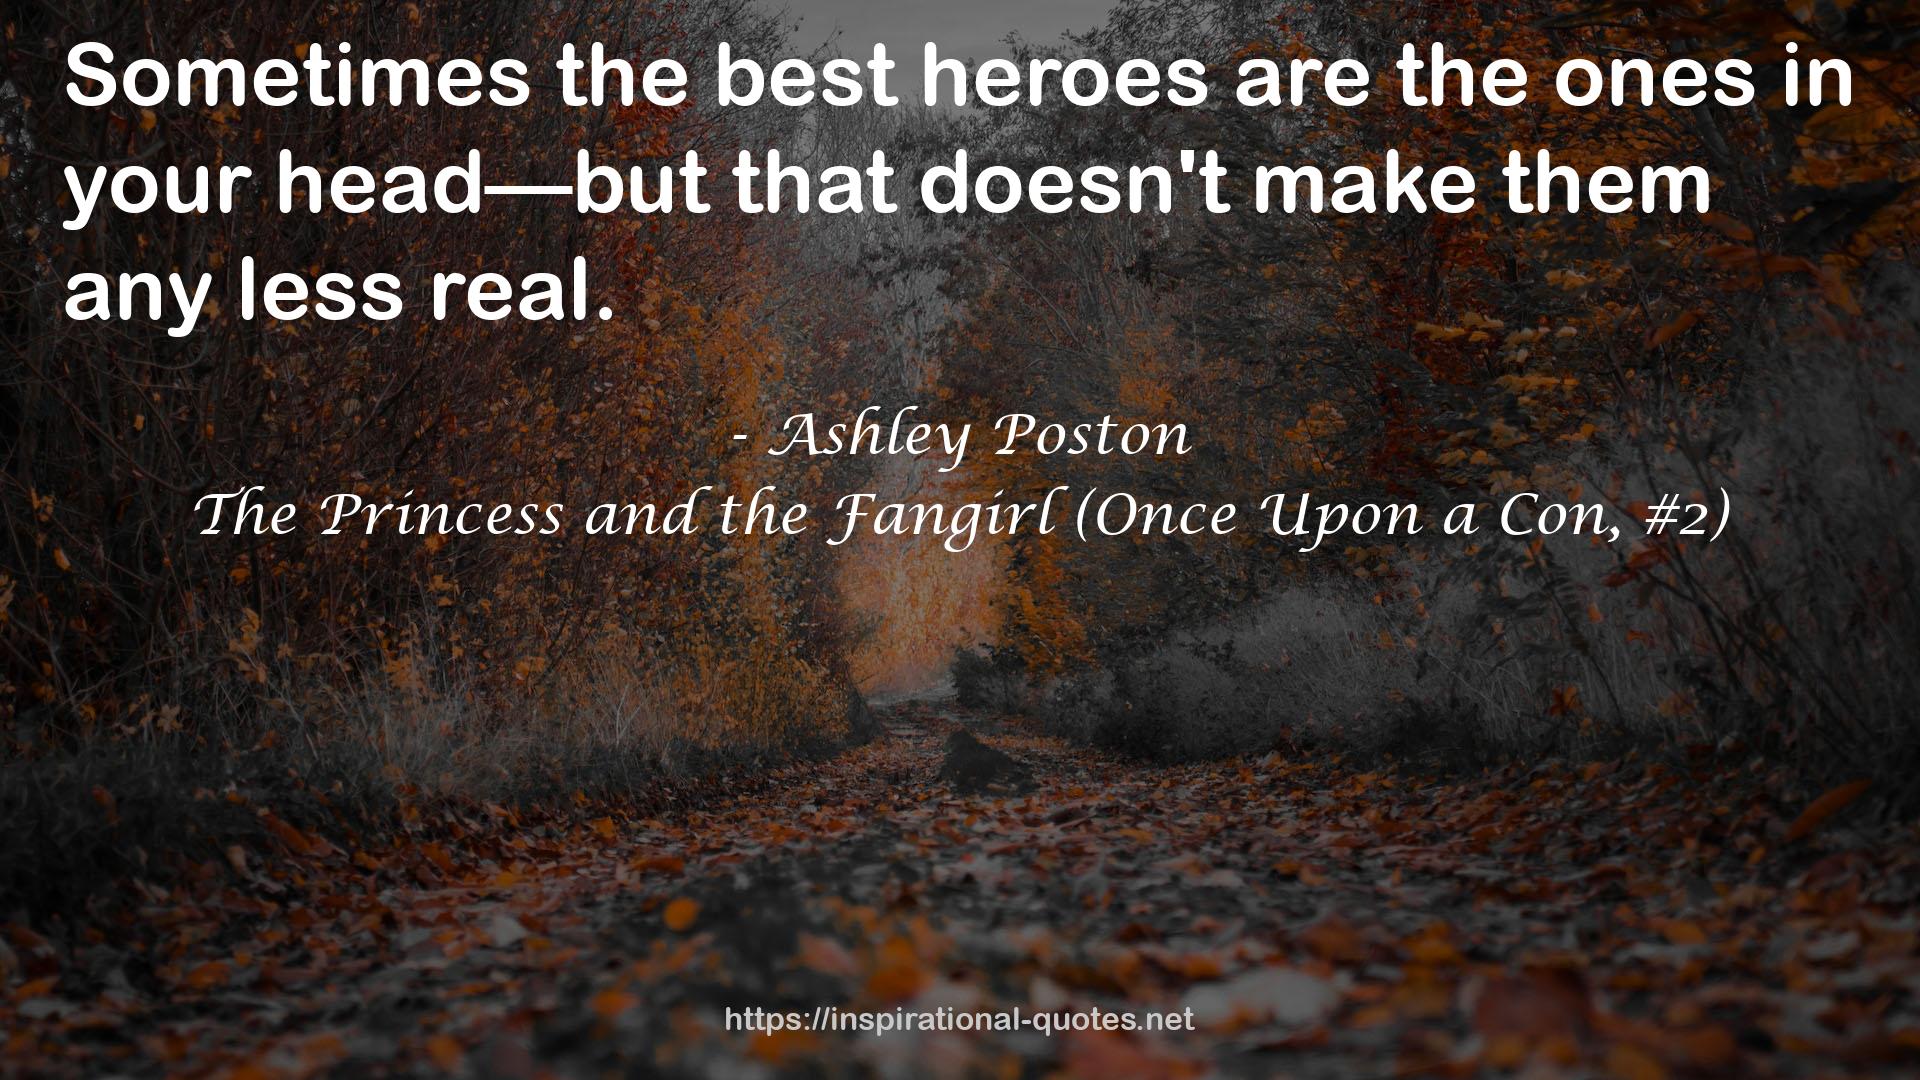 The Princess and the Fangirl (Once Upon a Con, #2) QUOTES